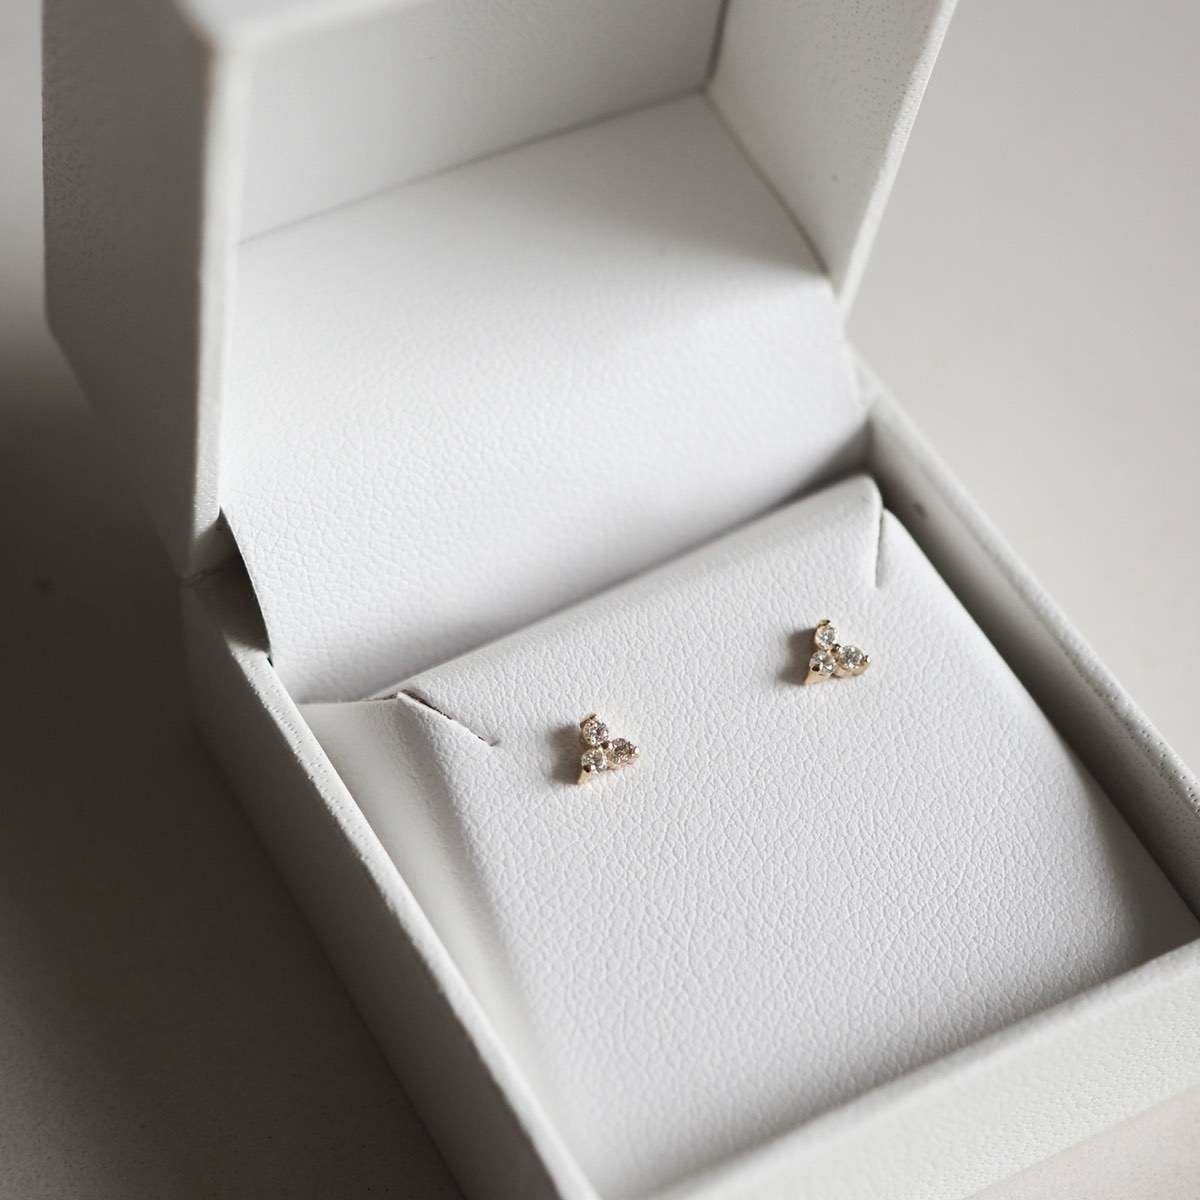 9ct Yellow Gold Therefore Studs made for everyday wear, in a white K&K jewellery box